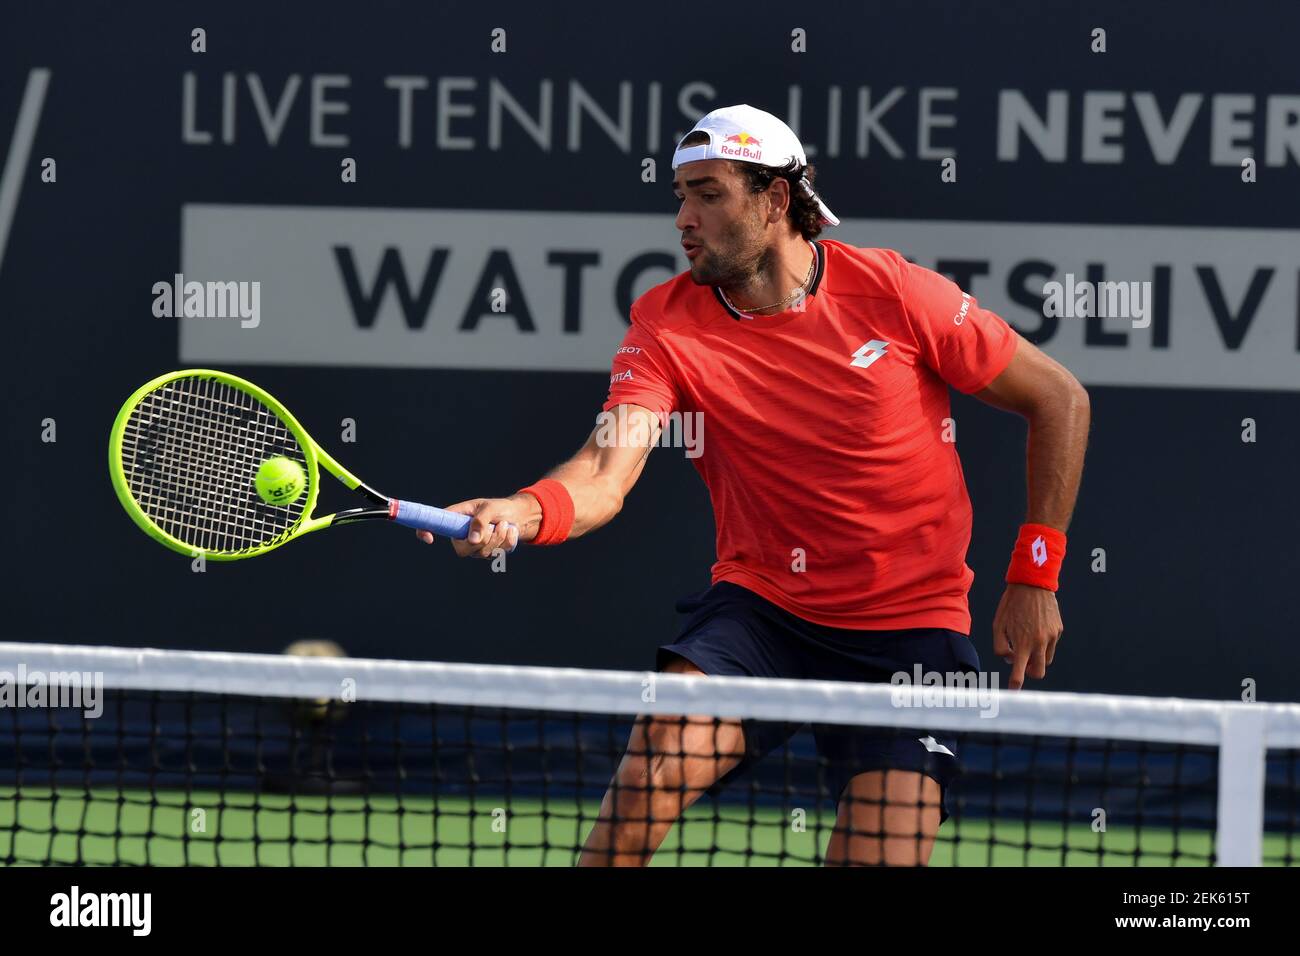 Matteo Berrettini plays match against Dustin Brown at the Patrick Mouratoglou Academy launches, this Sunday, on June 14, 2020 his big idea the Ultimate tennis showdown (UTS)